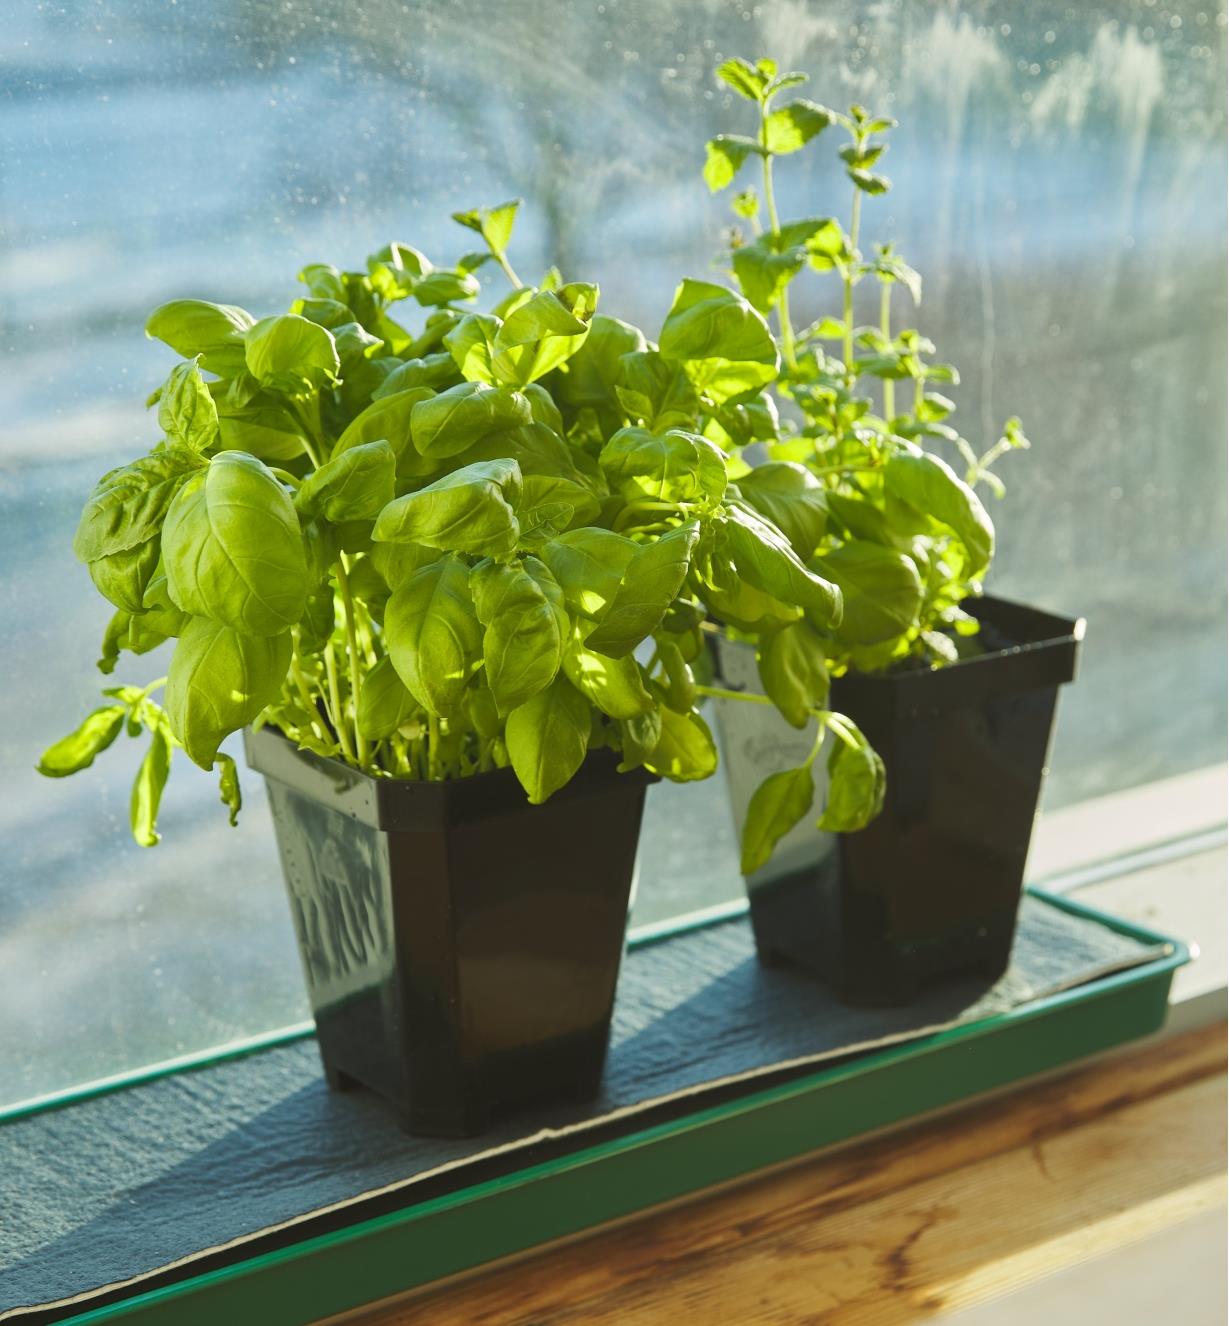 Two black pots with plants on a self-watering window tray